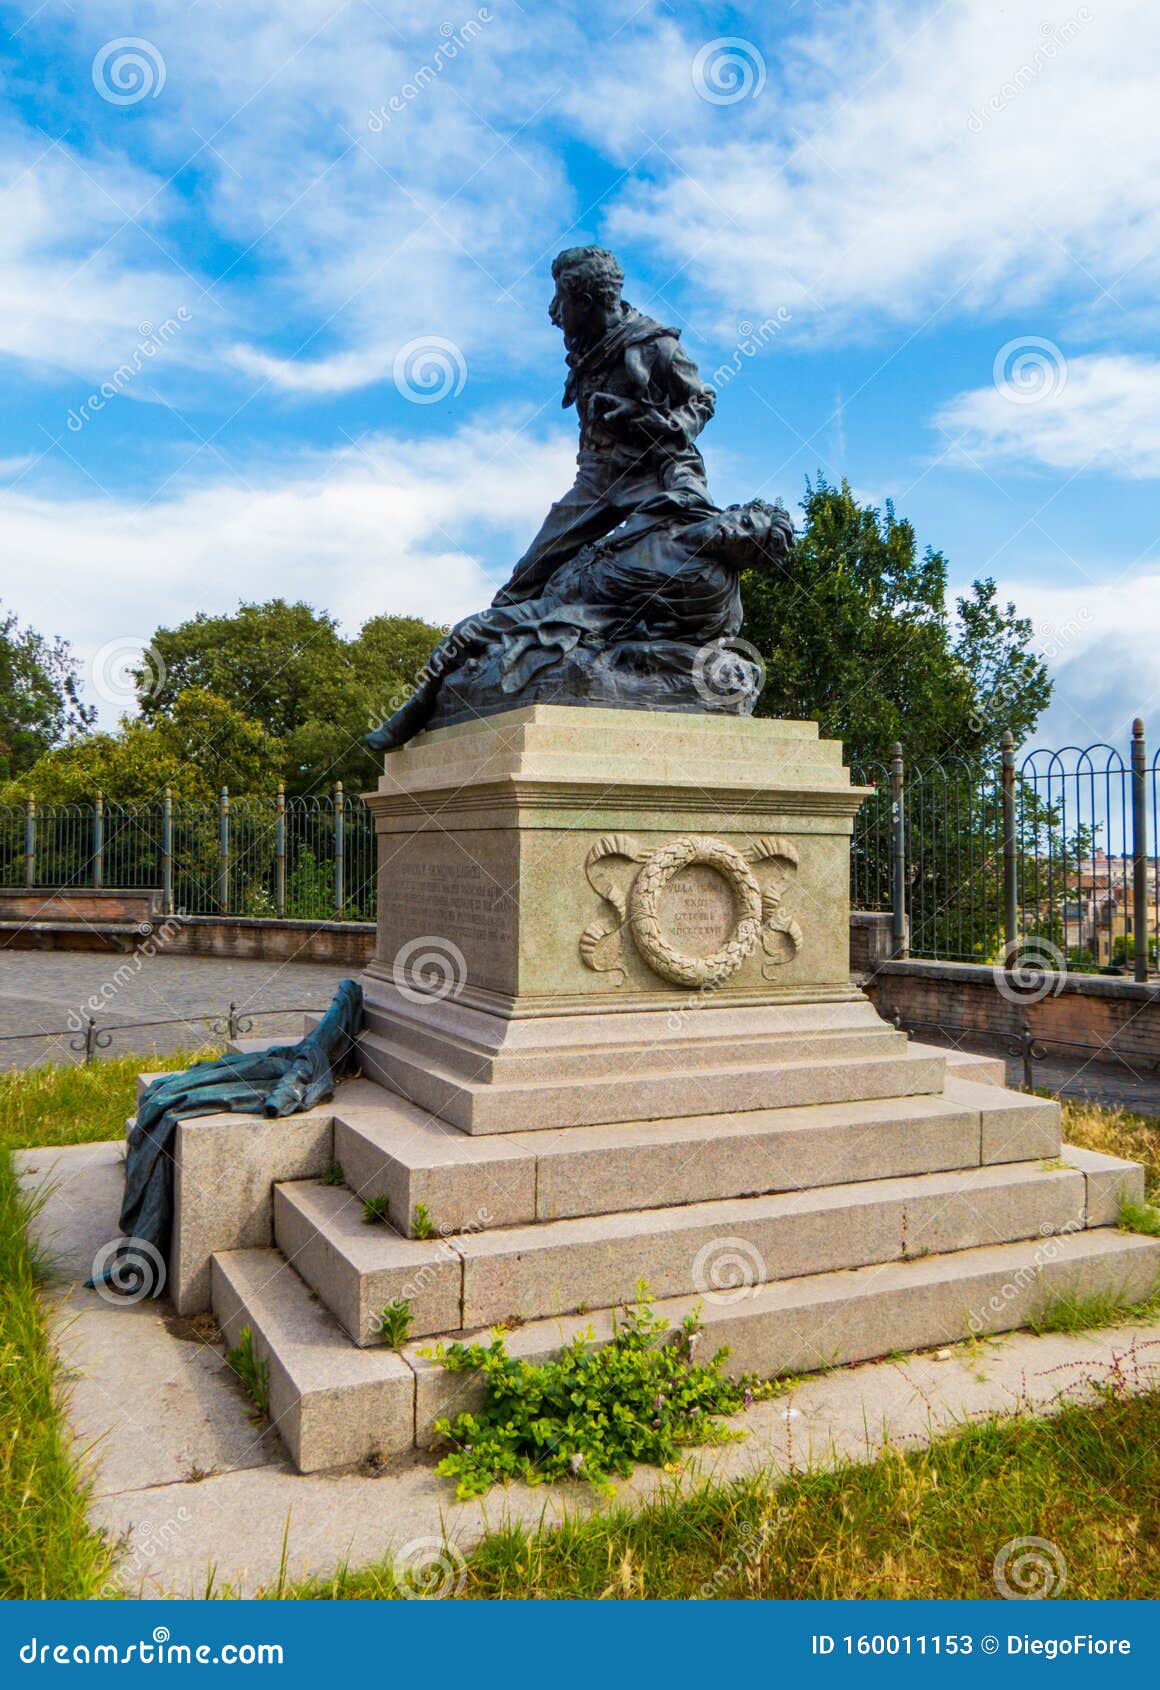 monument to enrico and giovanni cairoli, rome, italy